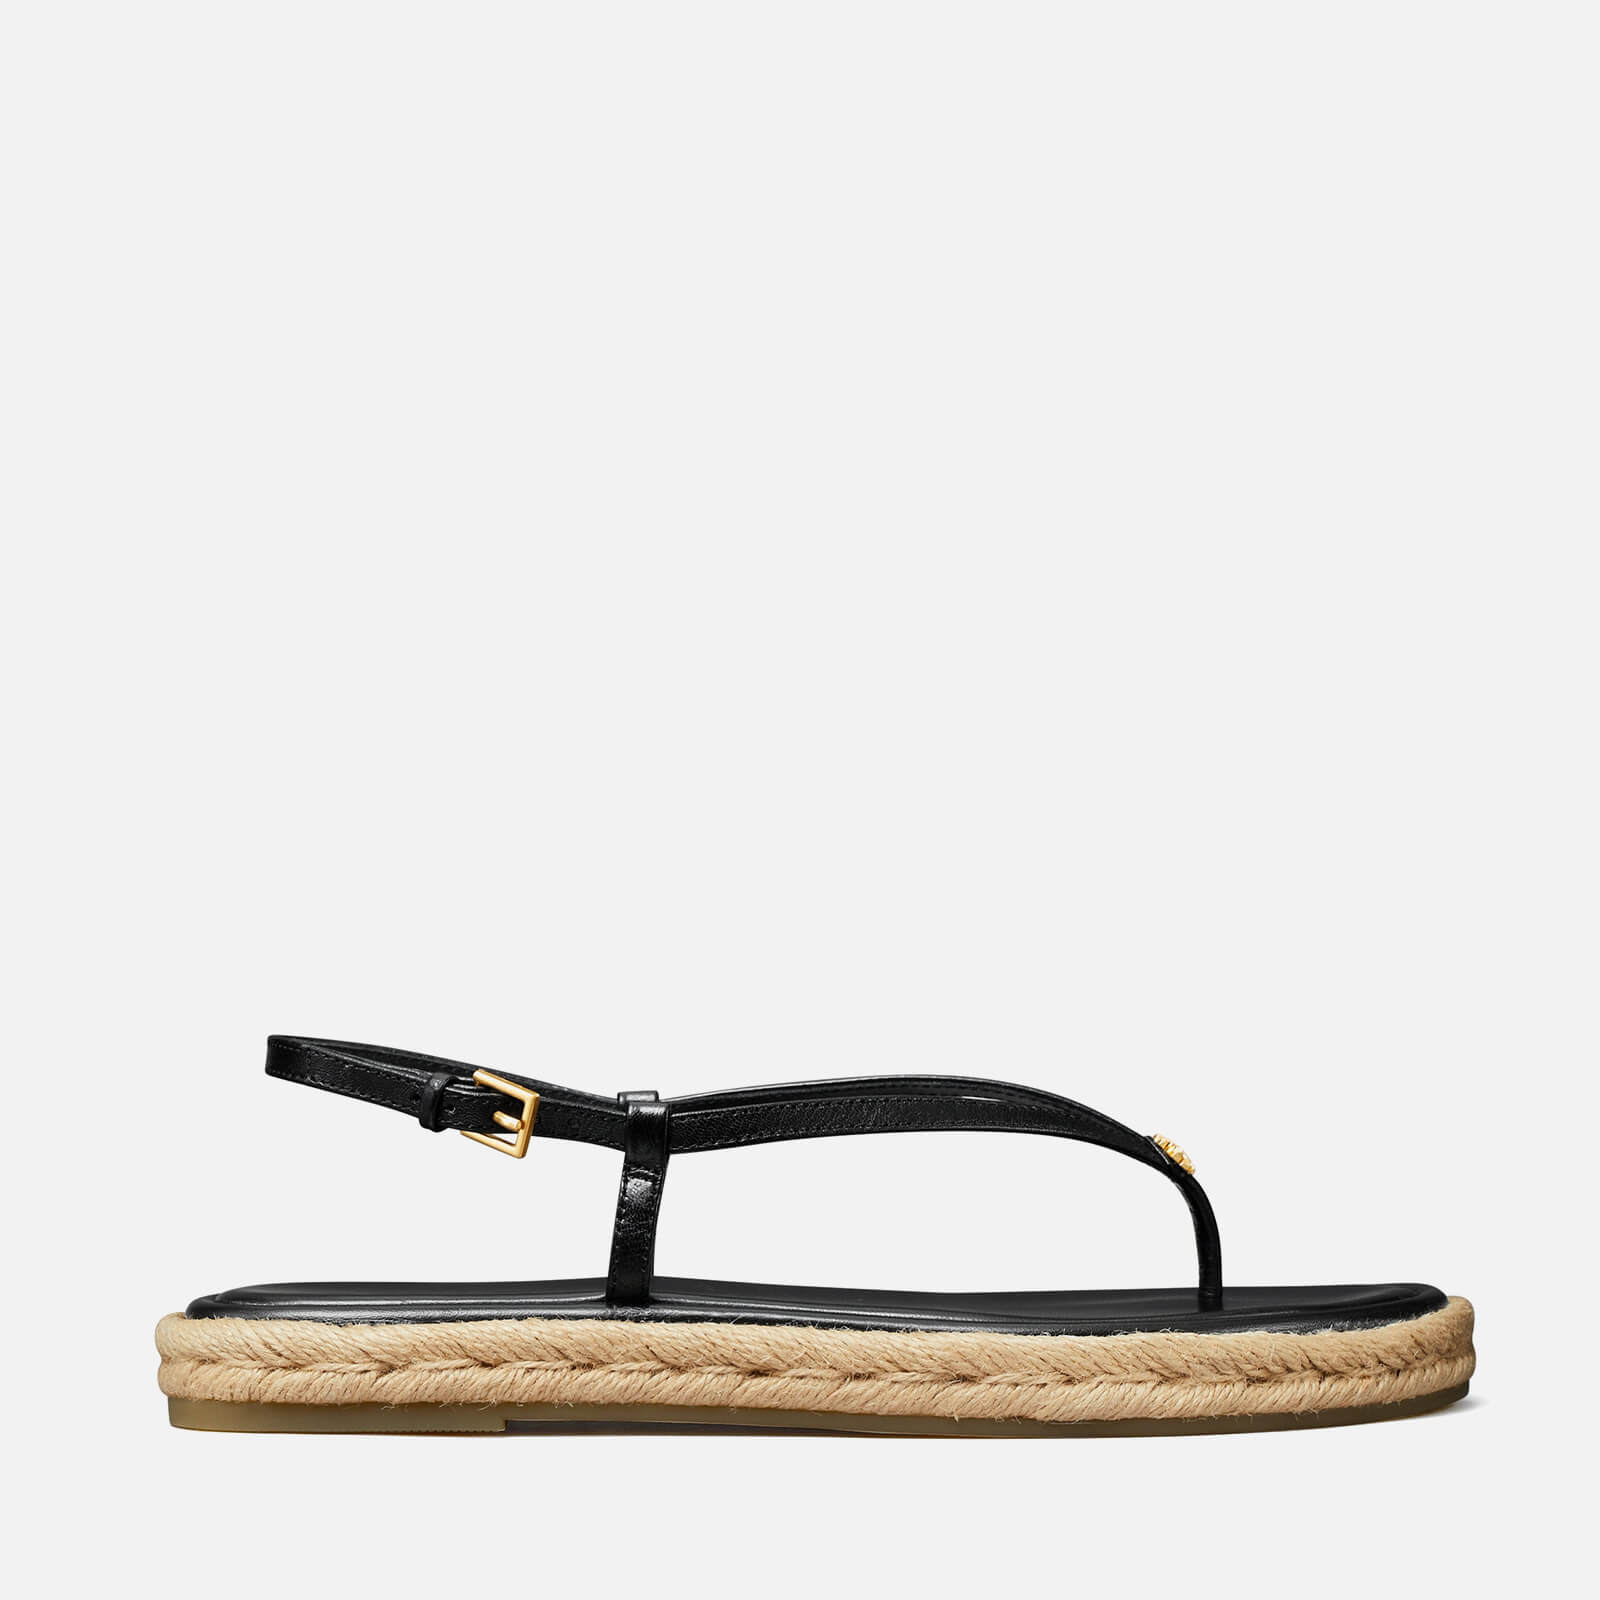 Tory Burch Women’s Leather Espadrille Sandals